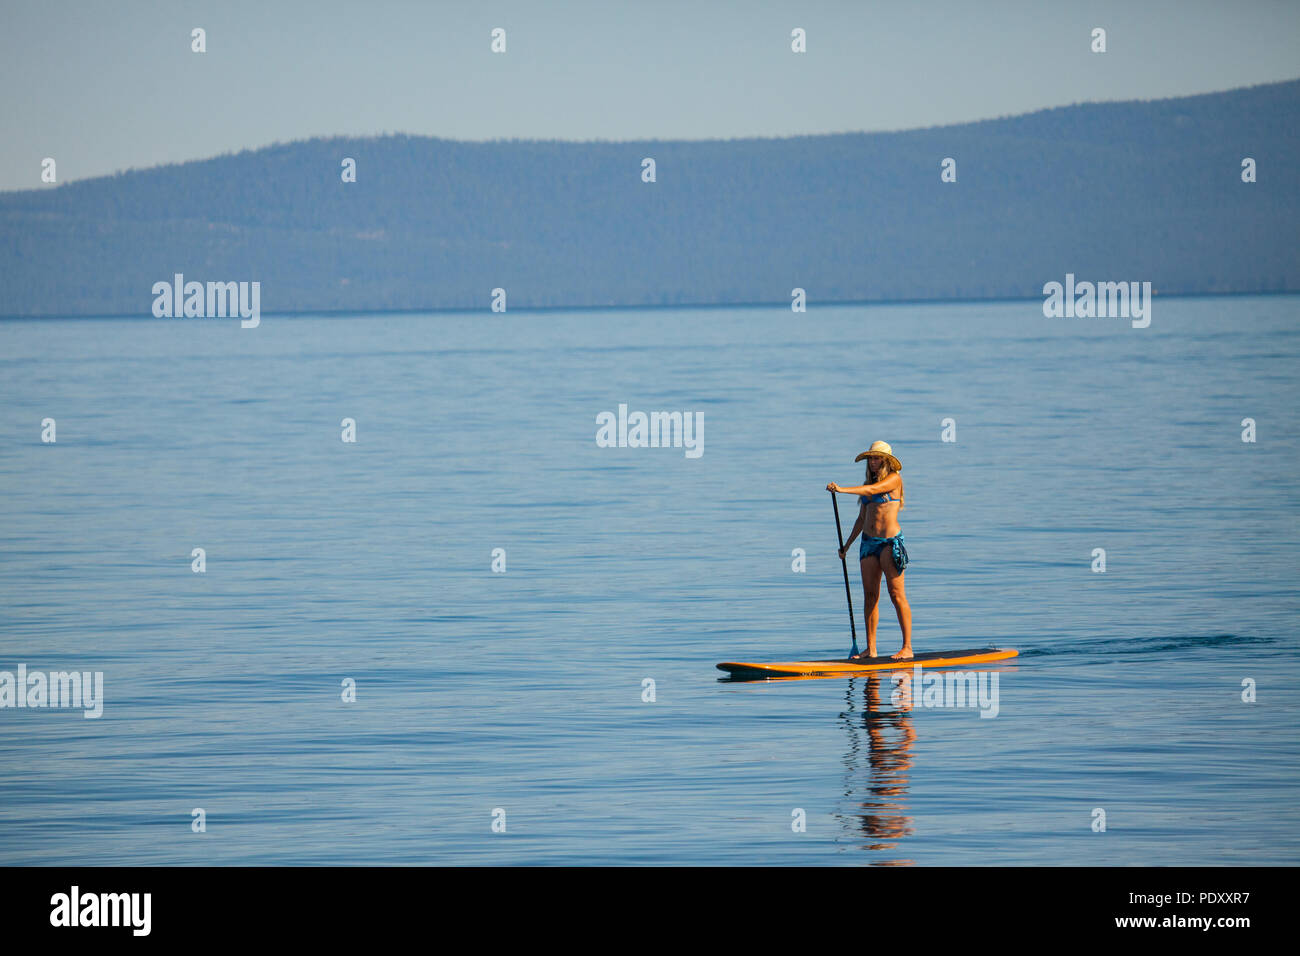 Woman on Paddle Board, Lake Tahoe, Nevada, USA Banque D'Images